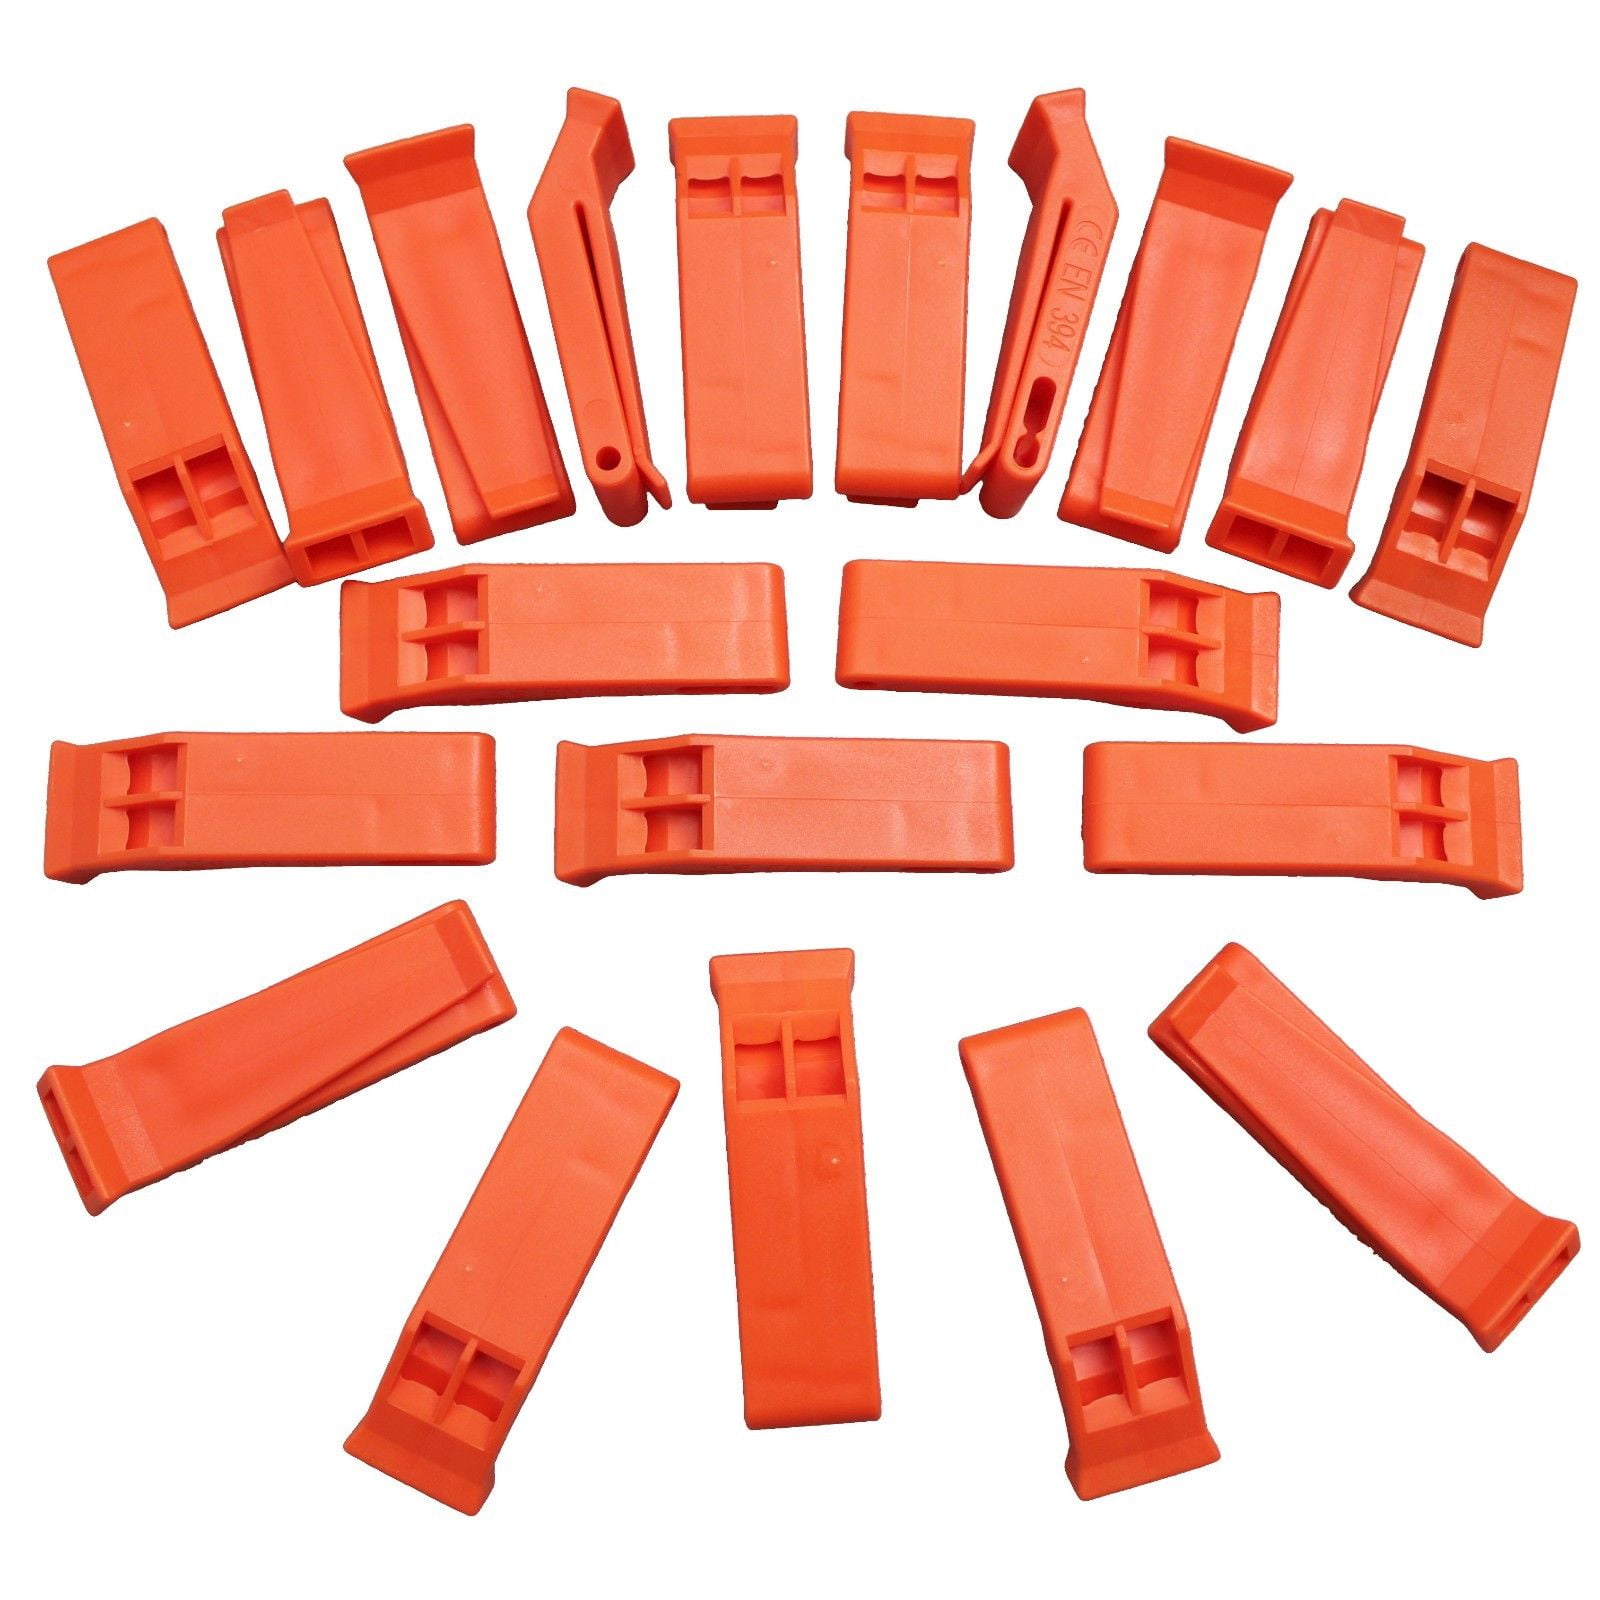 2 Pack Orange Plastic Safety Whistle for Boats Raft Emergency 200335 